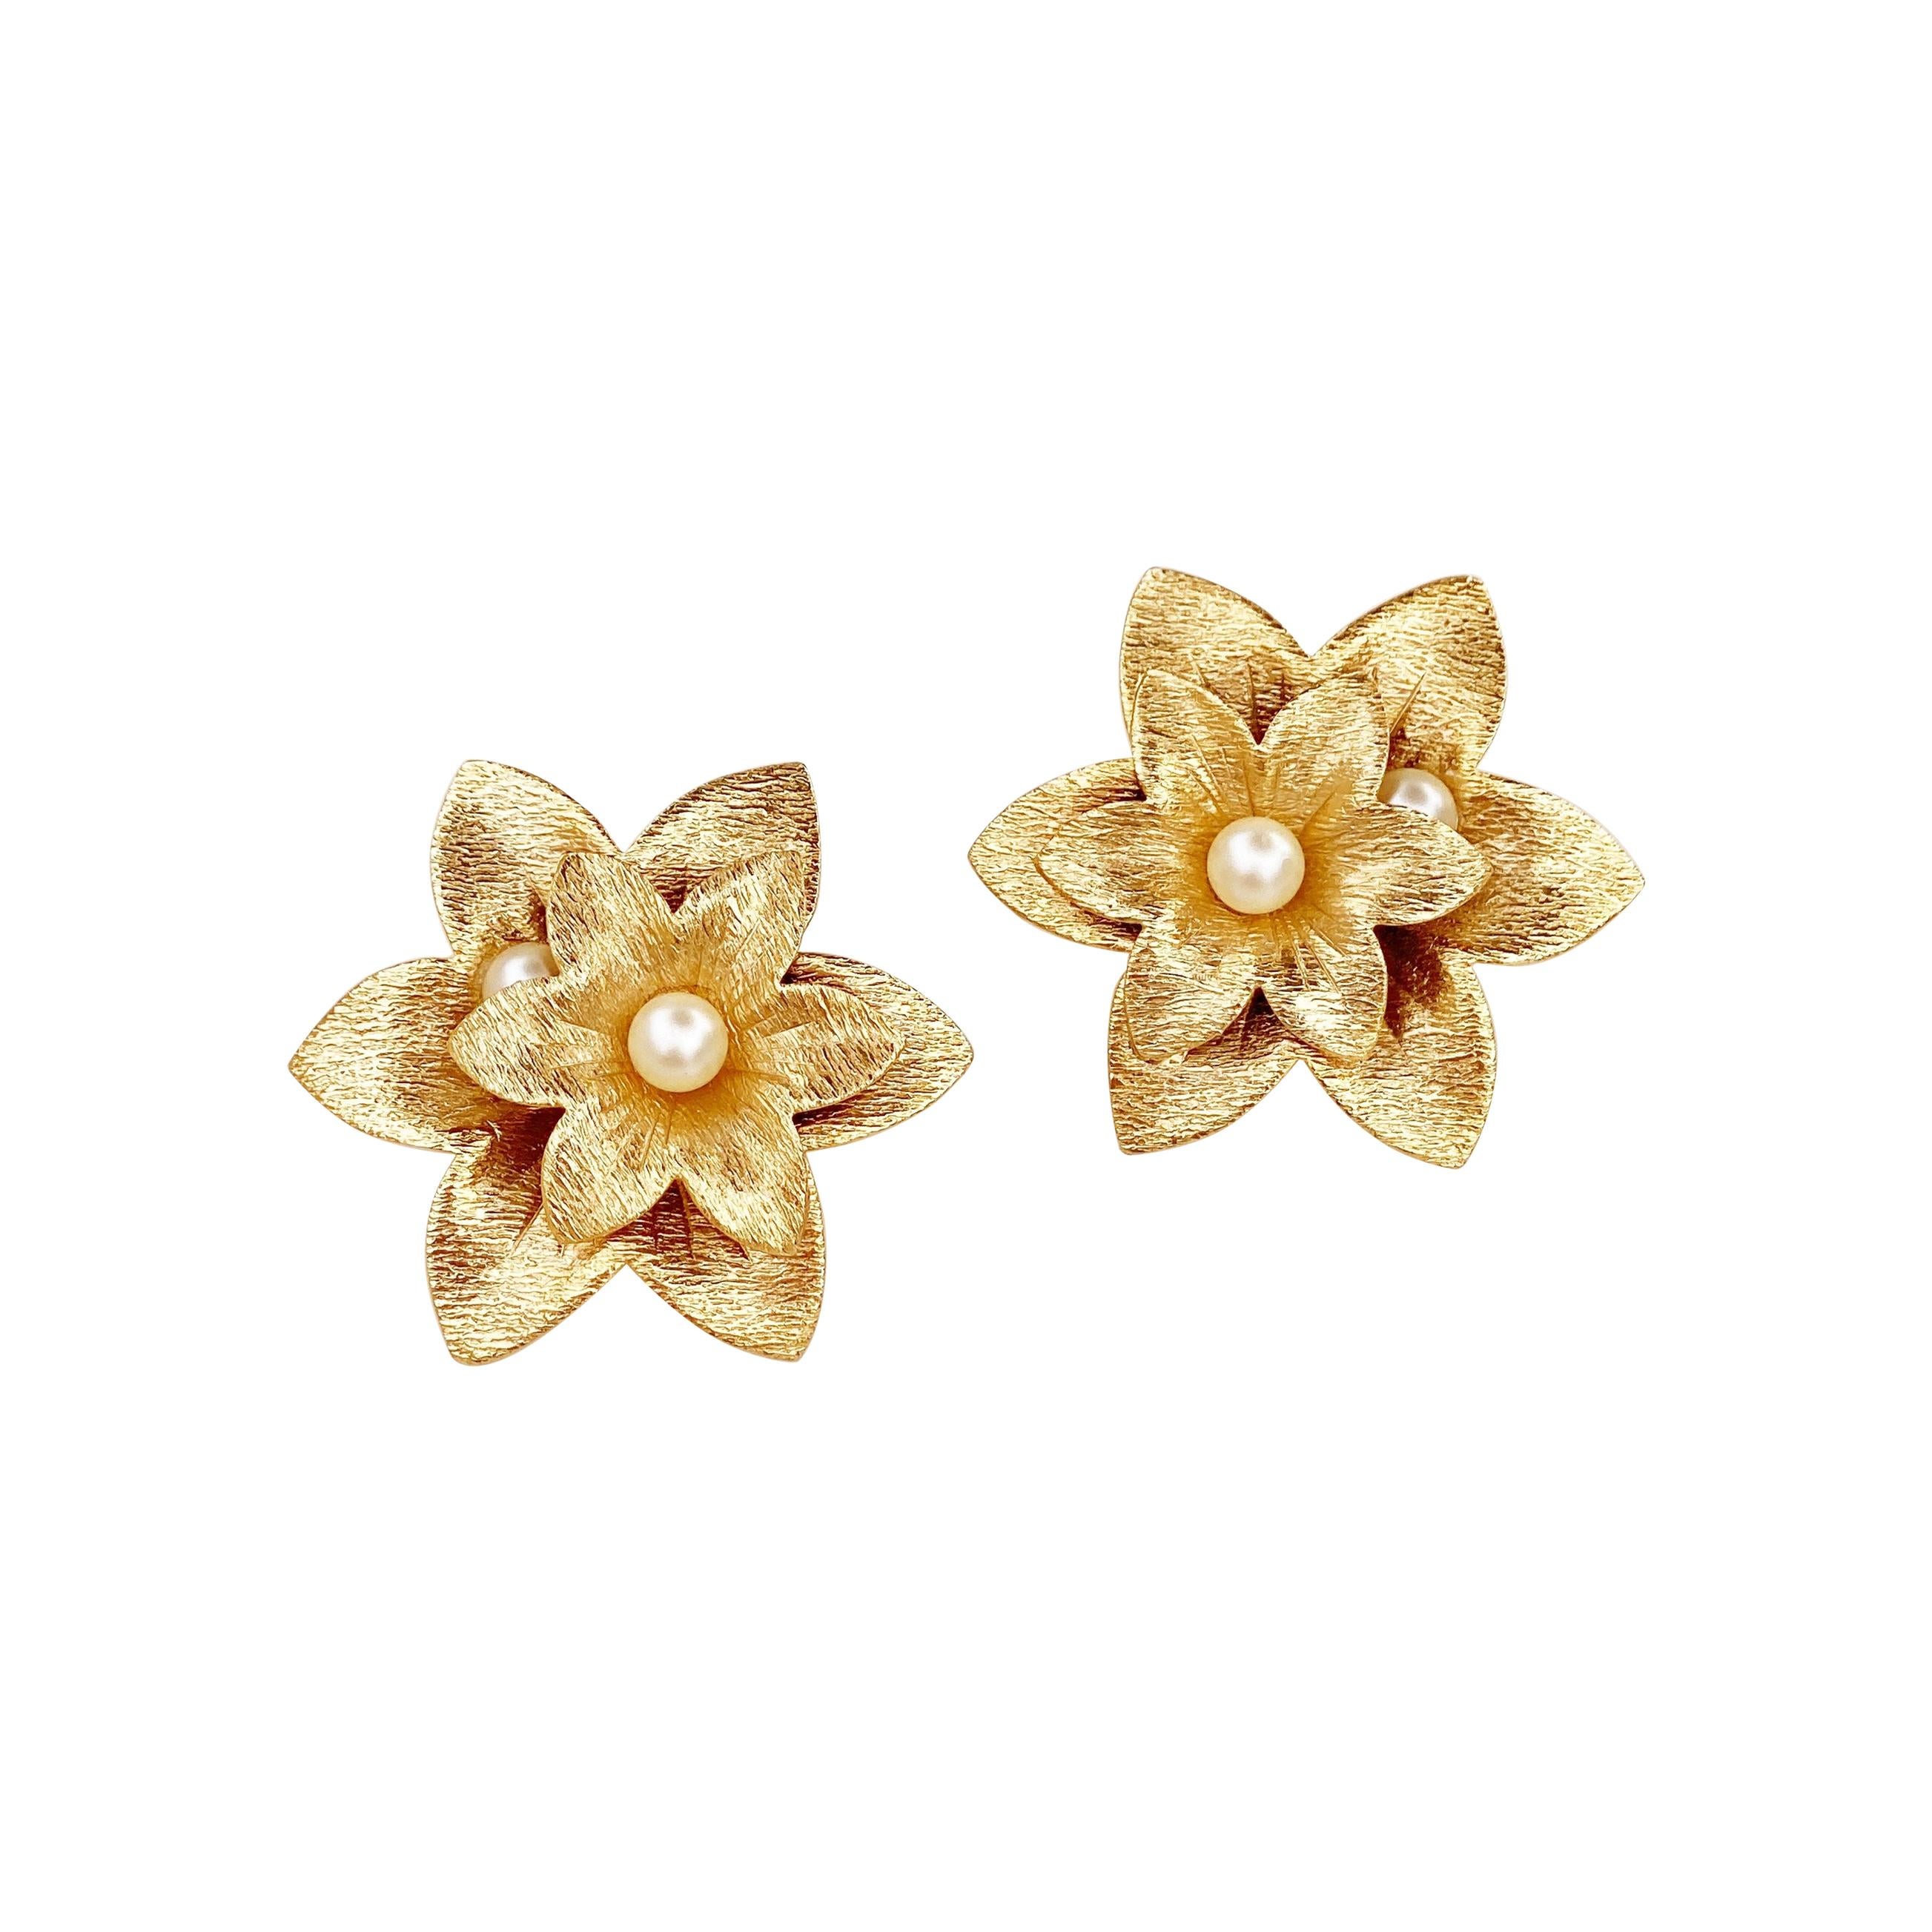 Oversized Textured Gold Flower Earrings By Sarah Coventry, 1970s